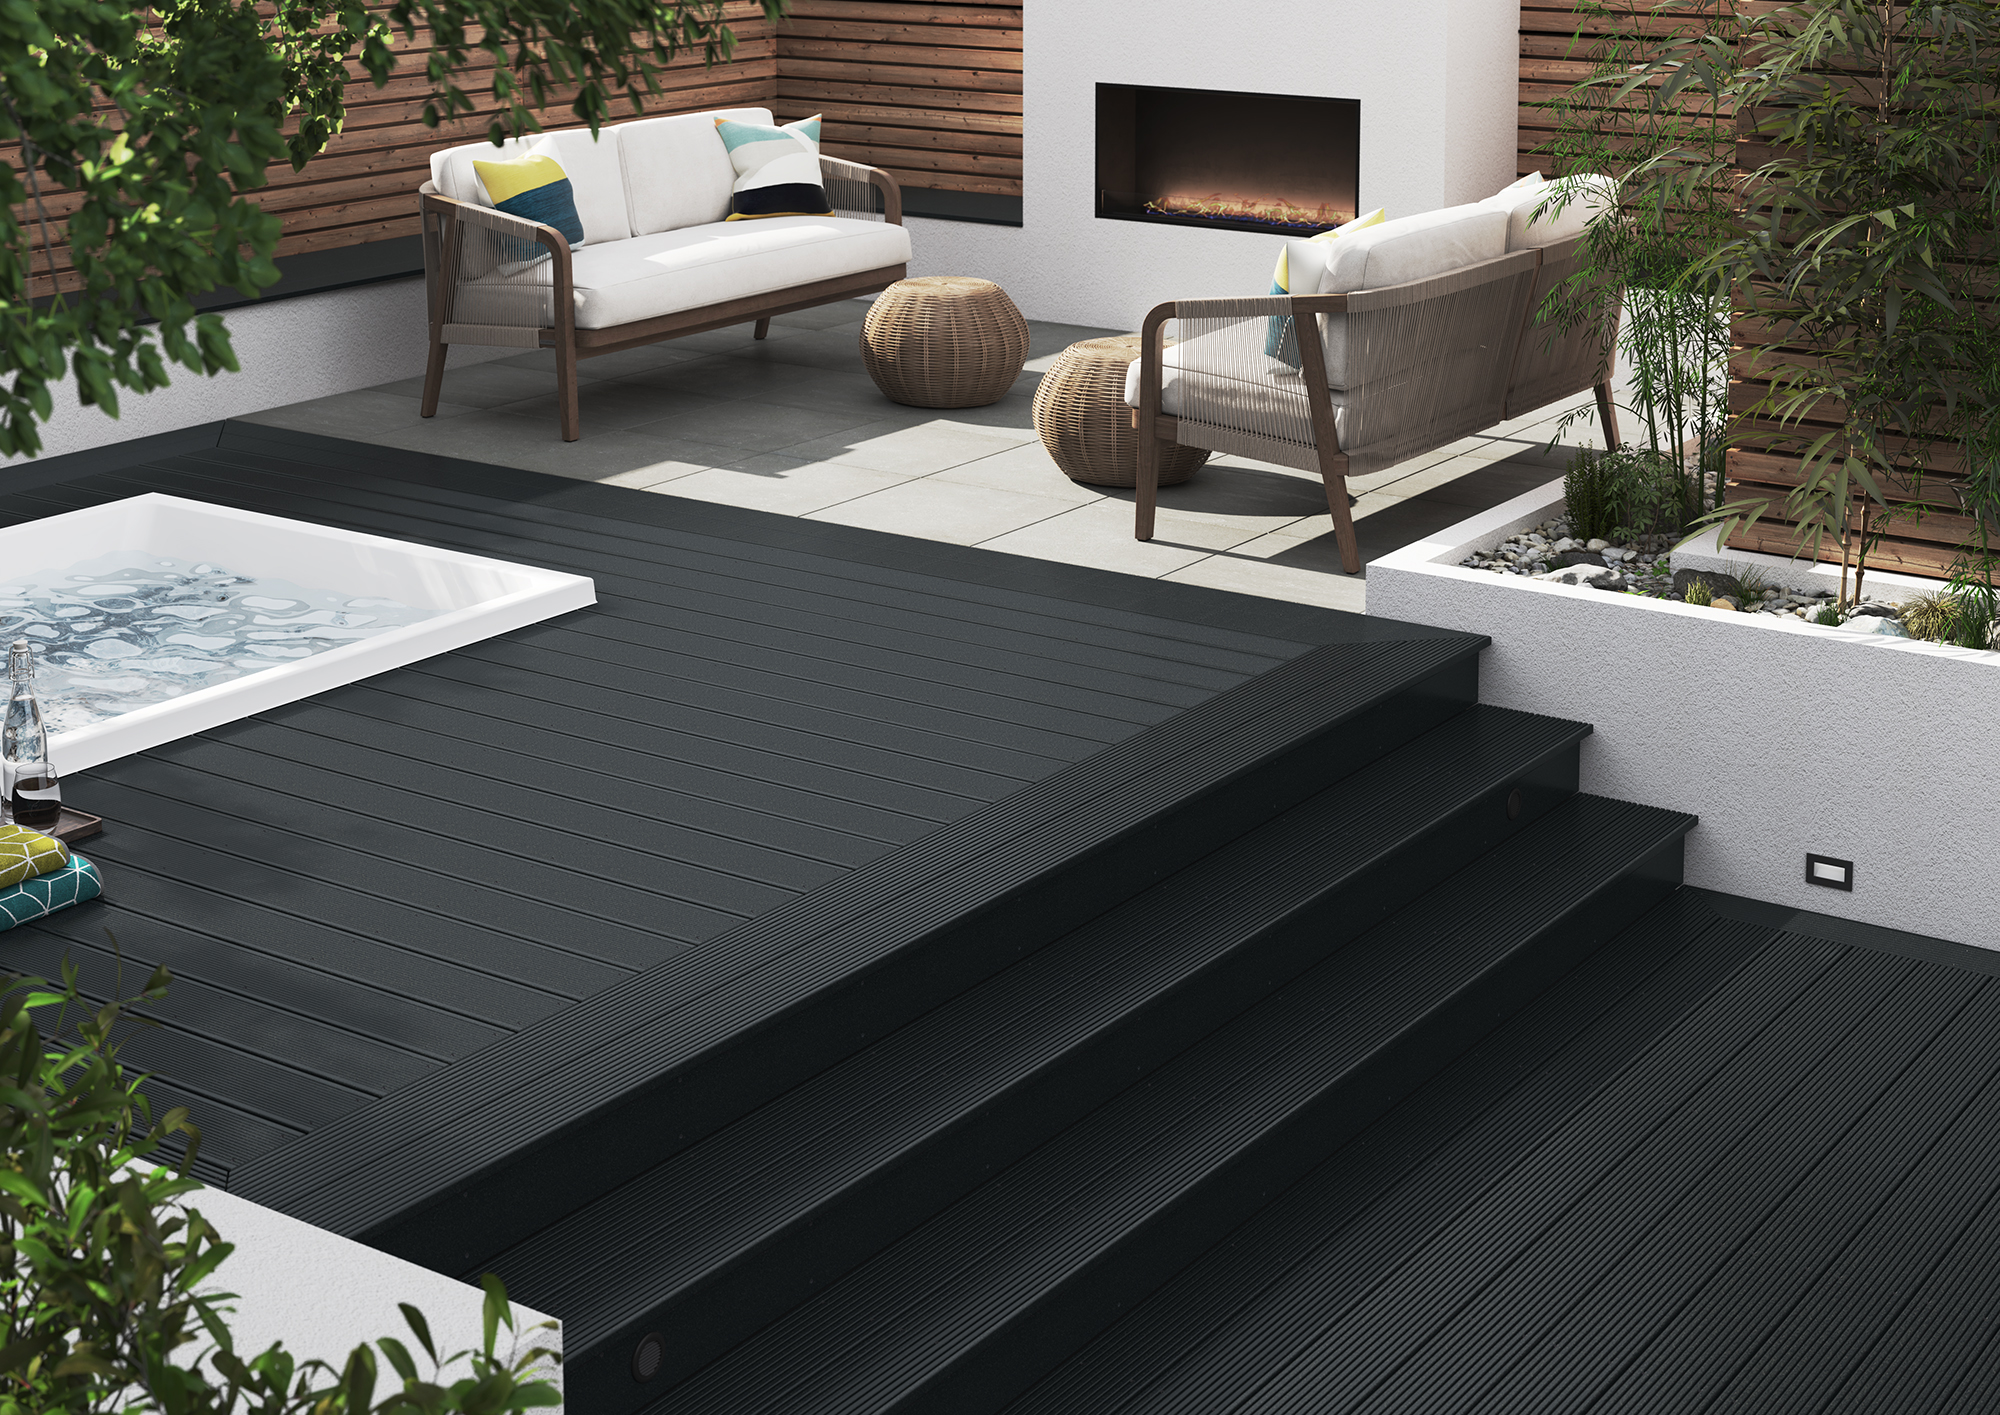 Sustainable, stylish, safe – create your perfect outdoor space with Ecodek